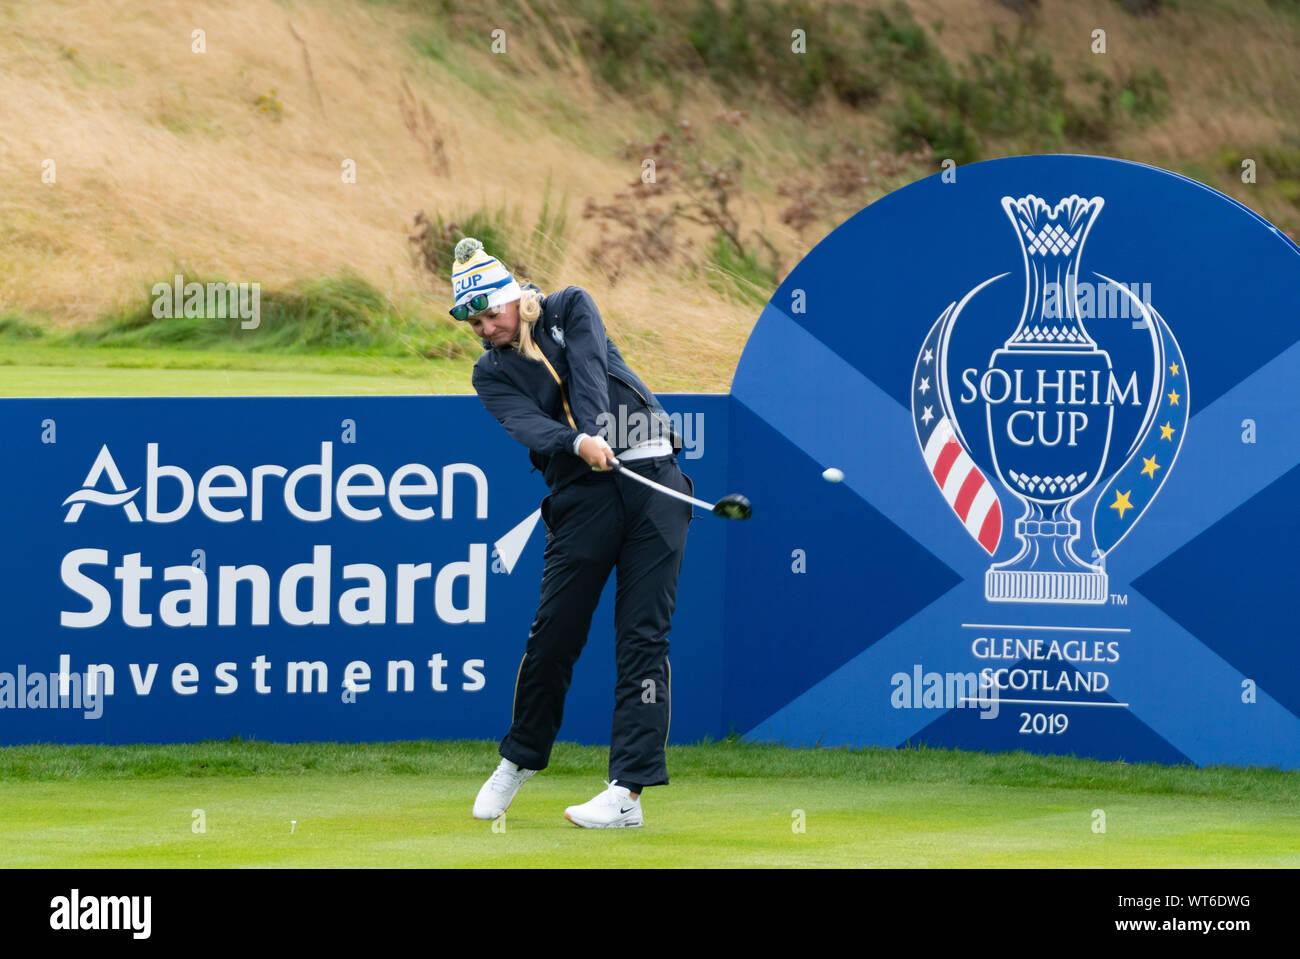 Auchterarder, Scotland, UK. 11th Sep, 2019. Practice day 3 for the 2019 Solheim Cup at the Centenary Course at Gleneagles. Pictured; Anna Nordqvist of Europe tees off. Credit: Iain Masterton/Alamy Live News Stock Photo